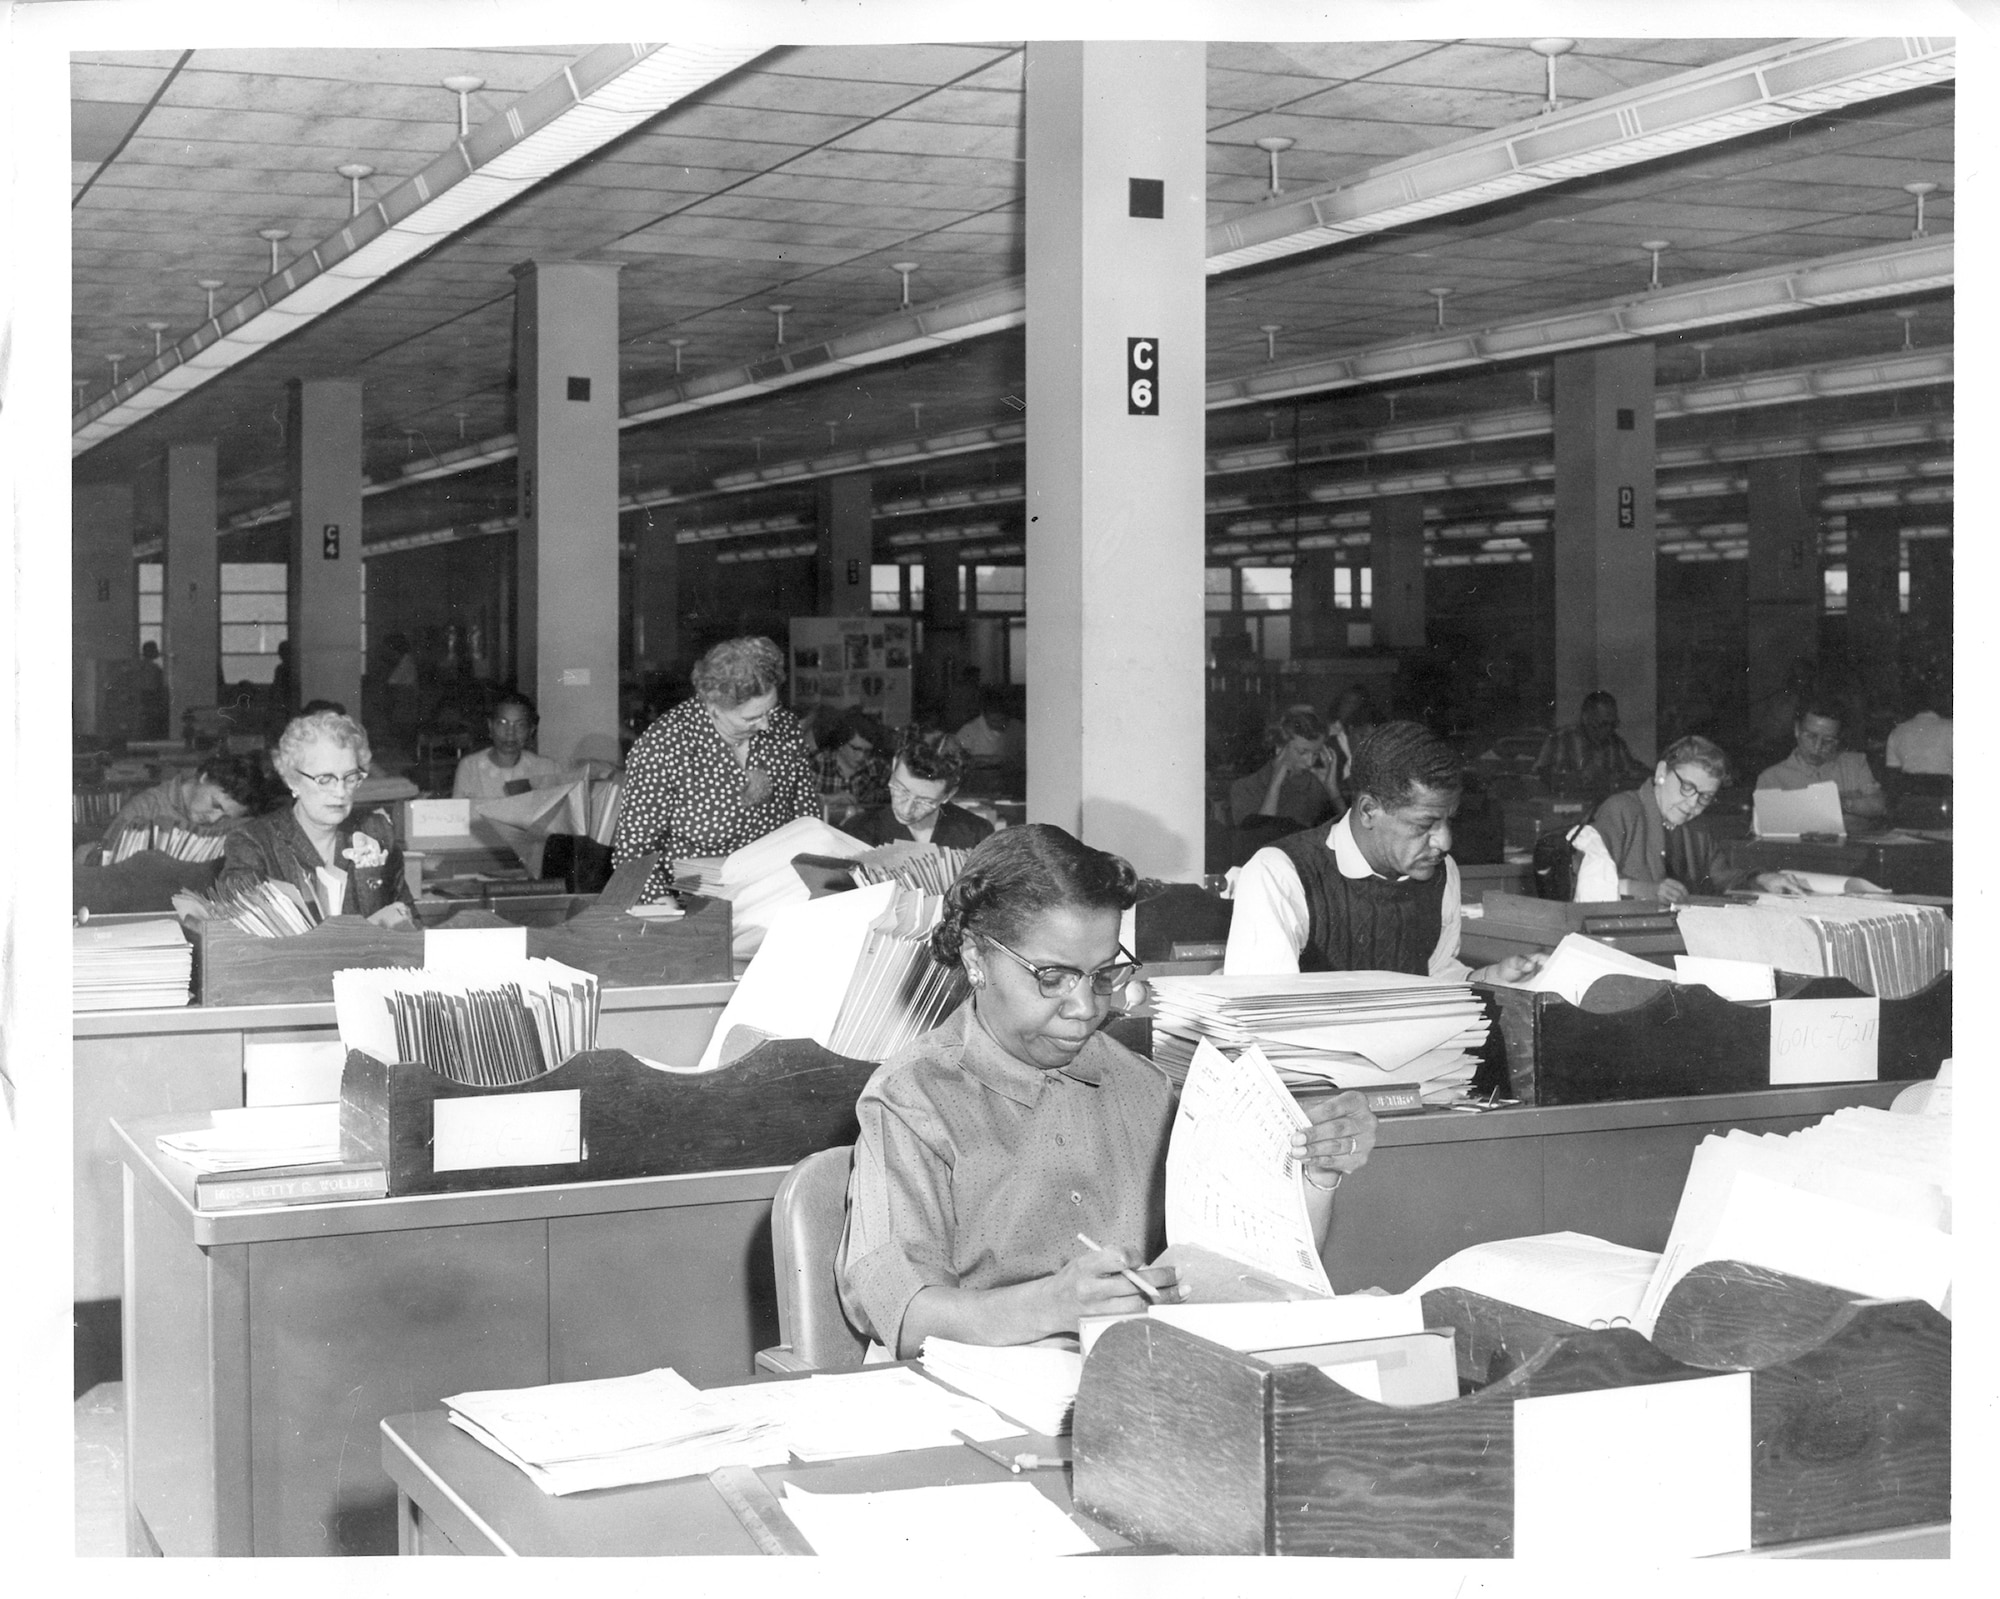 Employees at the Air Reserve Records Center working at their desks at the York Street building, Denver, Colo., in the 1950s. Employees did not have telephones or computers at their desks and by 1958, the center was responsible for nearly 500,000 records.